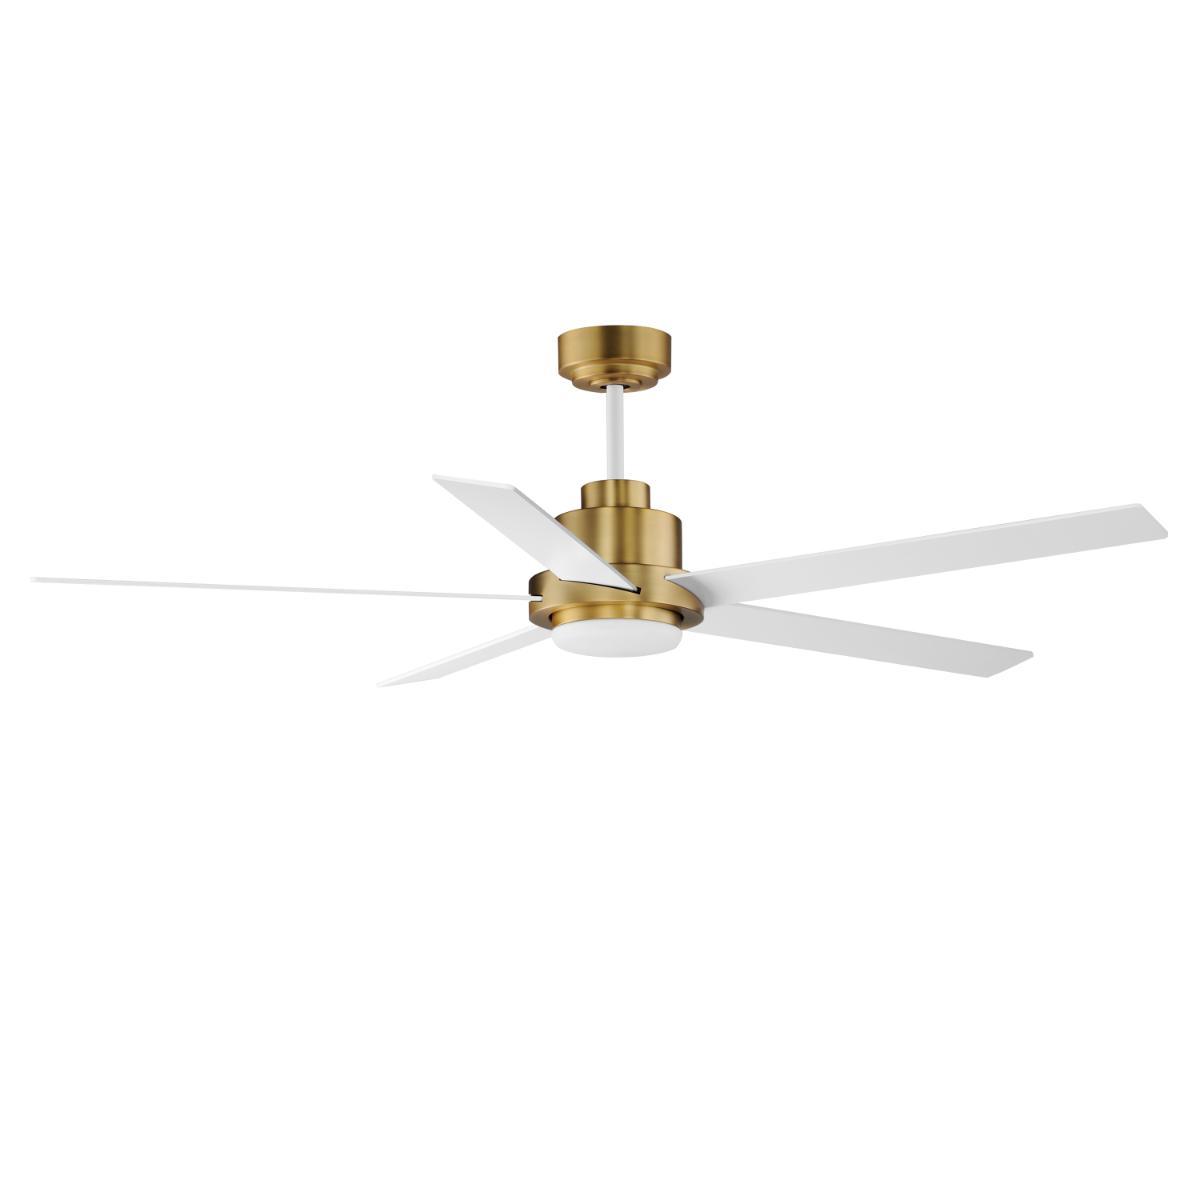 Daisy 60 Inch 5-Blade Ceiling Fan With Light and Wall Control